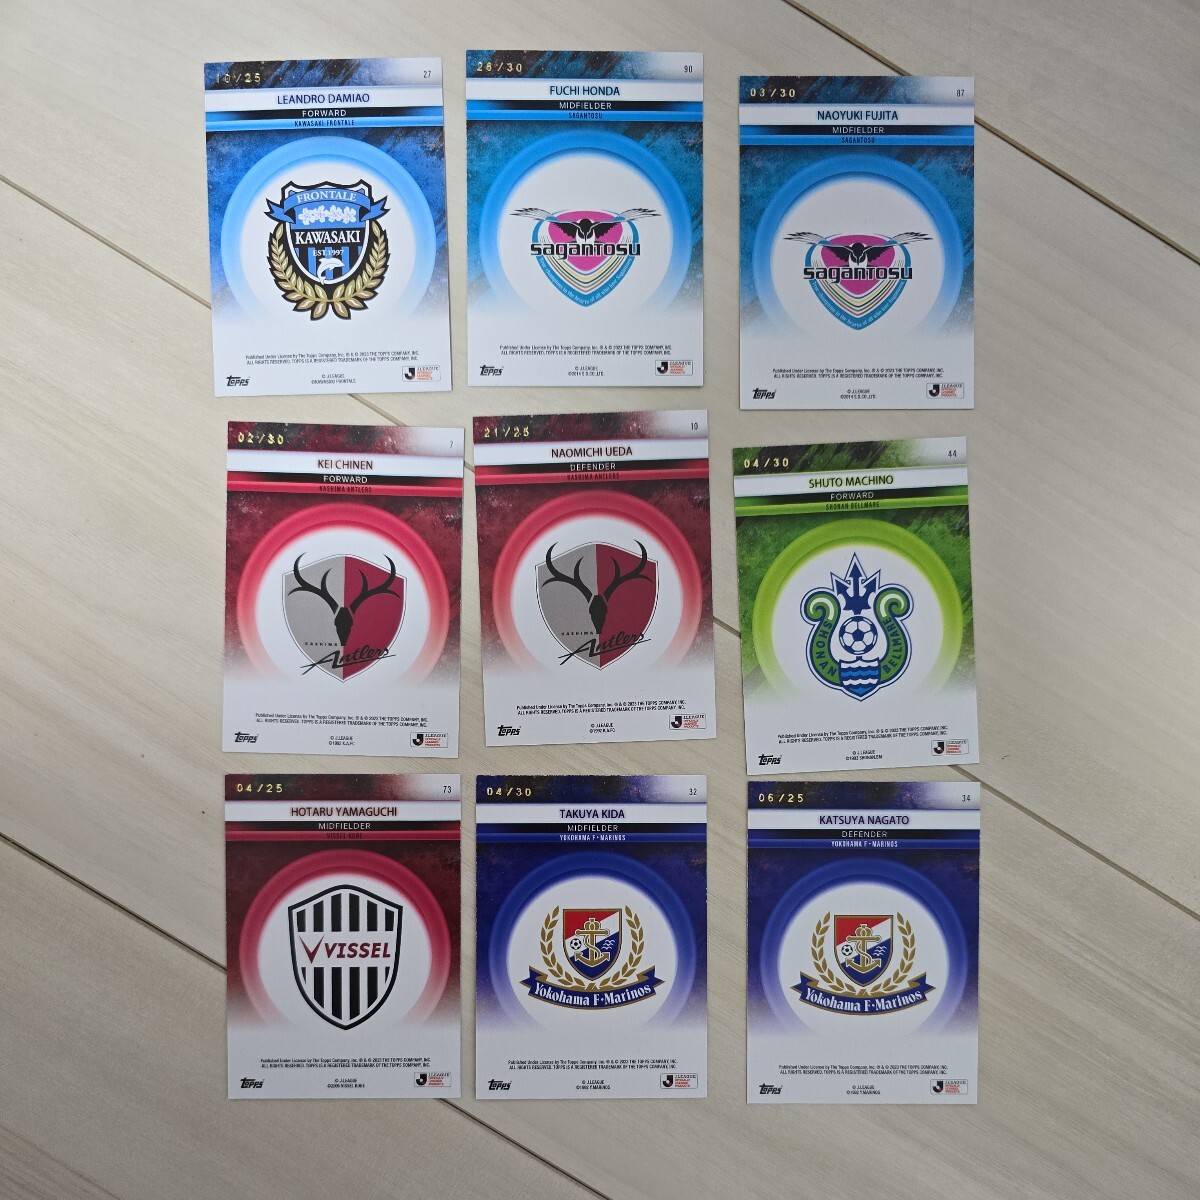 Topps J-league 30th Anniversary SPECIAL TRADING CardJリーグ 30周年企画 特別カード まとめ売りの画像2